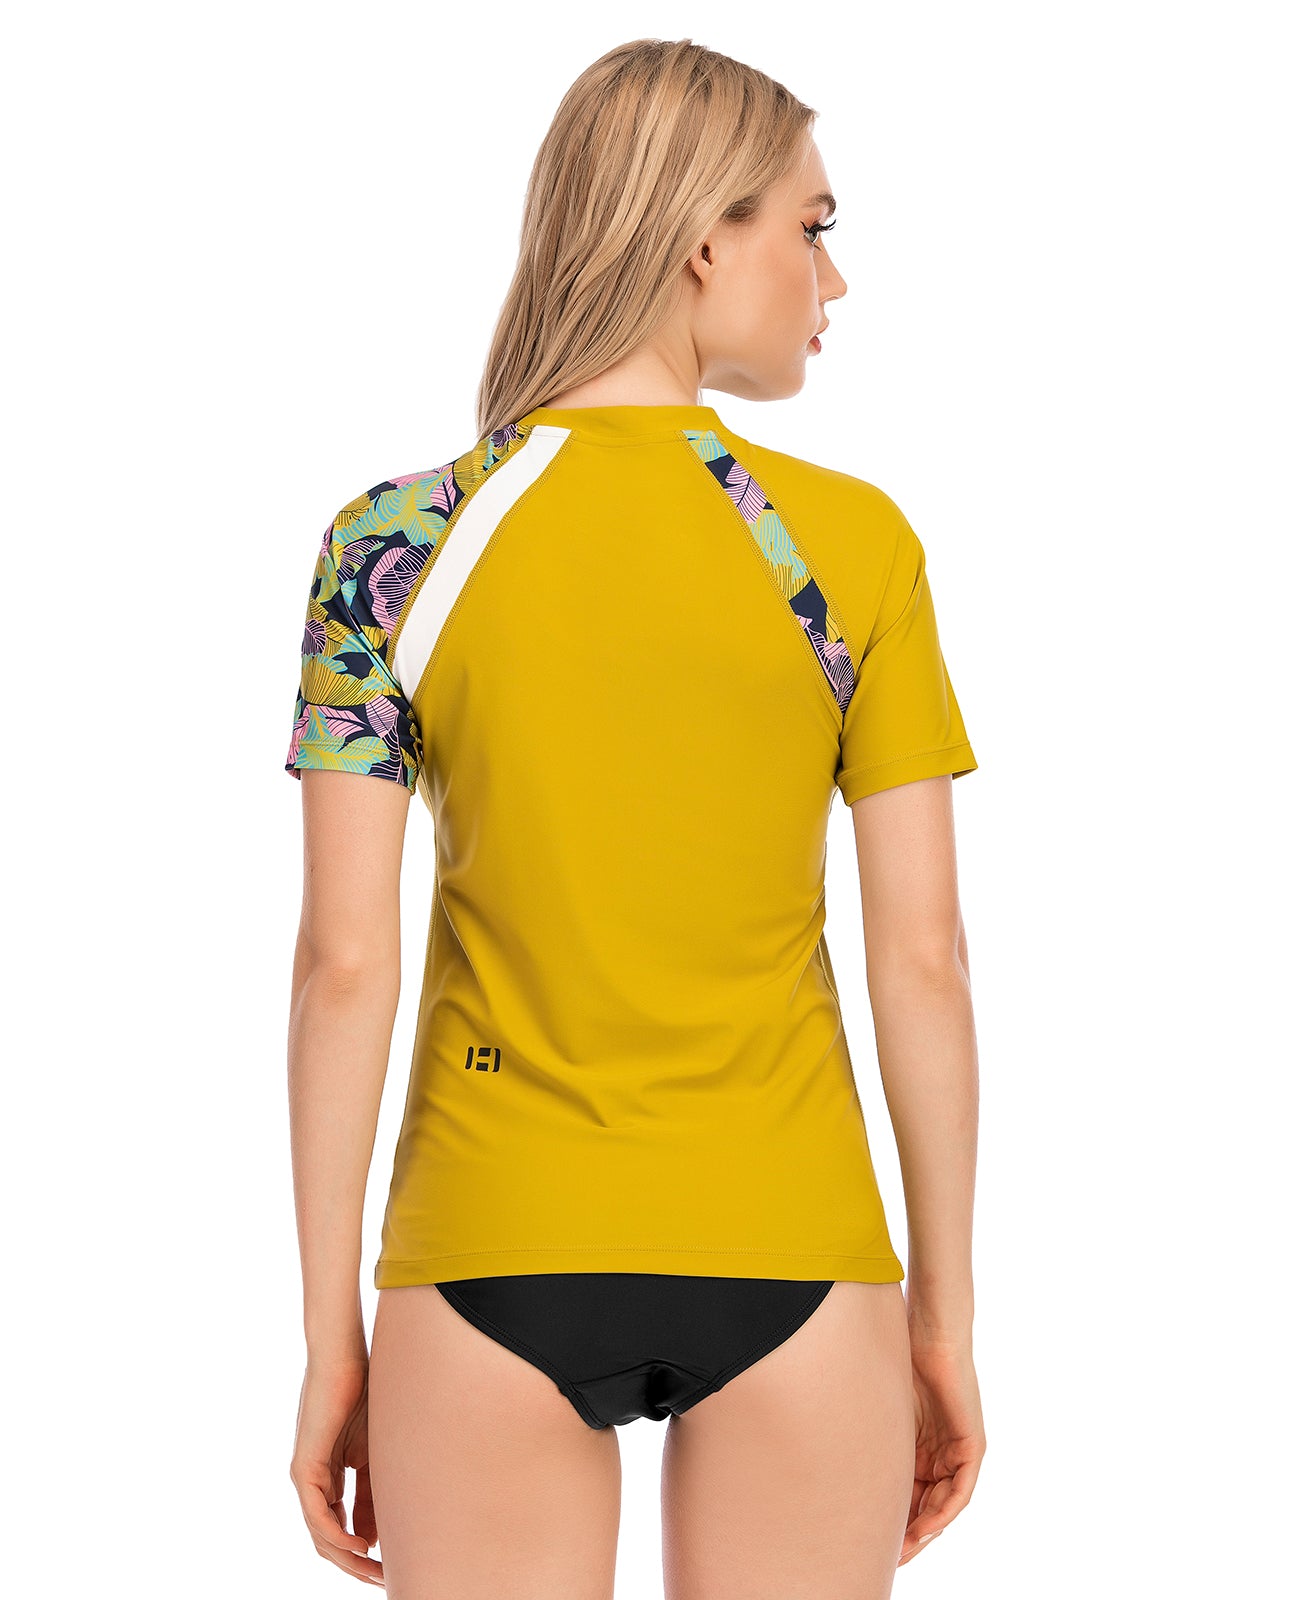 One for All Essential Short-Sleeves Rash Guard - Yellow